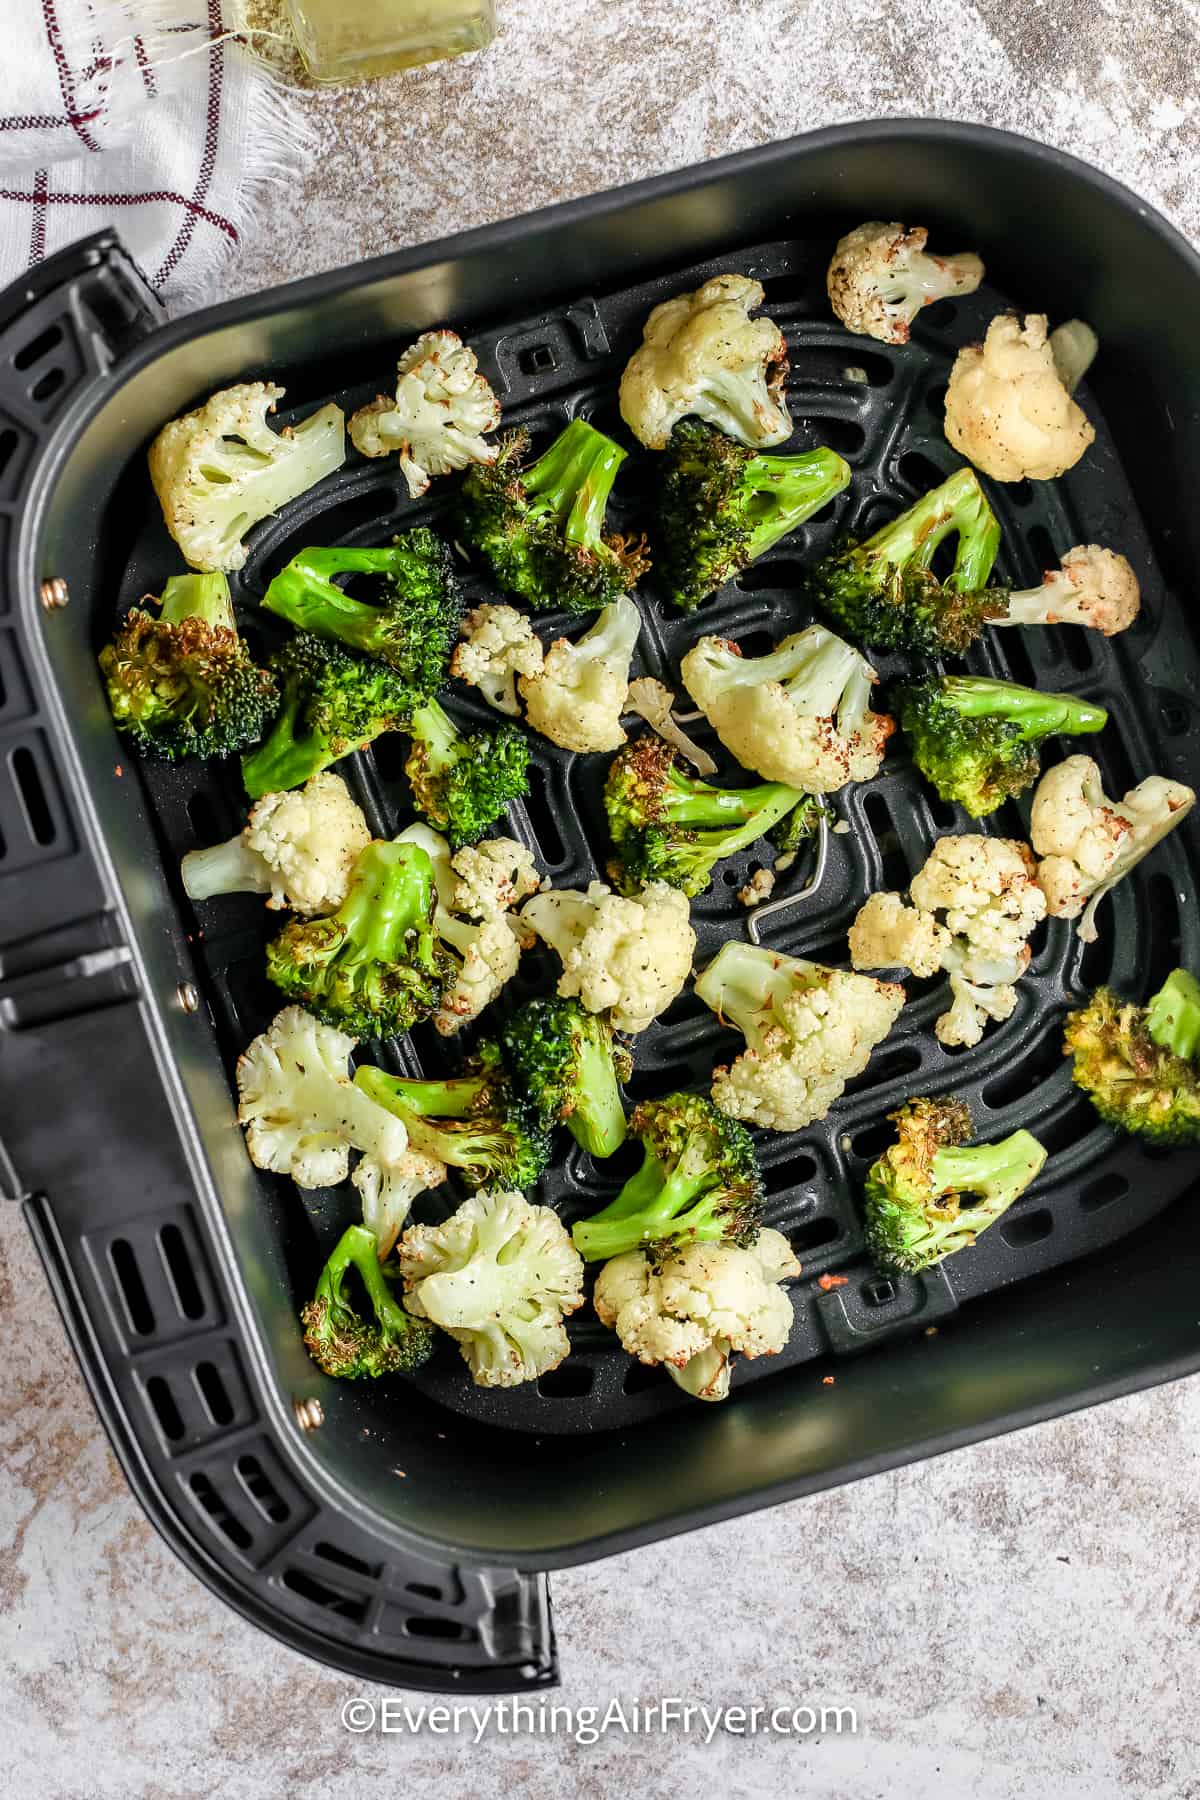 Broccoli and Cauliflower cooked in an air fryer basket